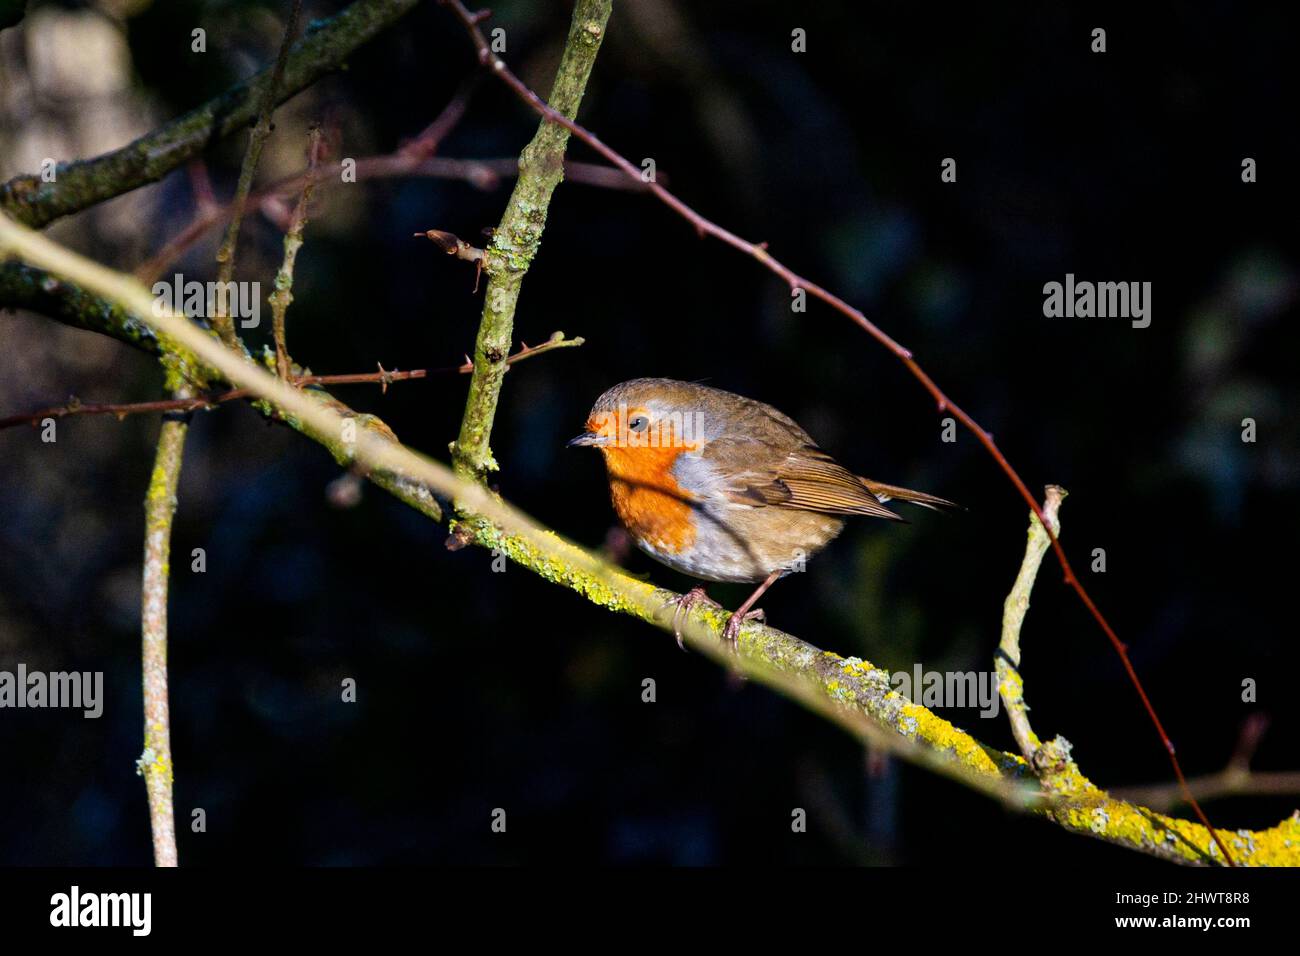 A robin (Erithacus rubecula) perched on a branch Stock Photo